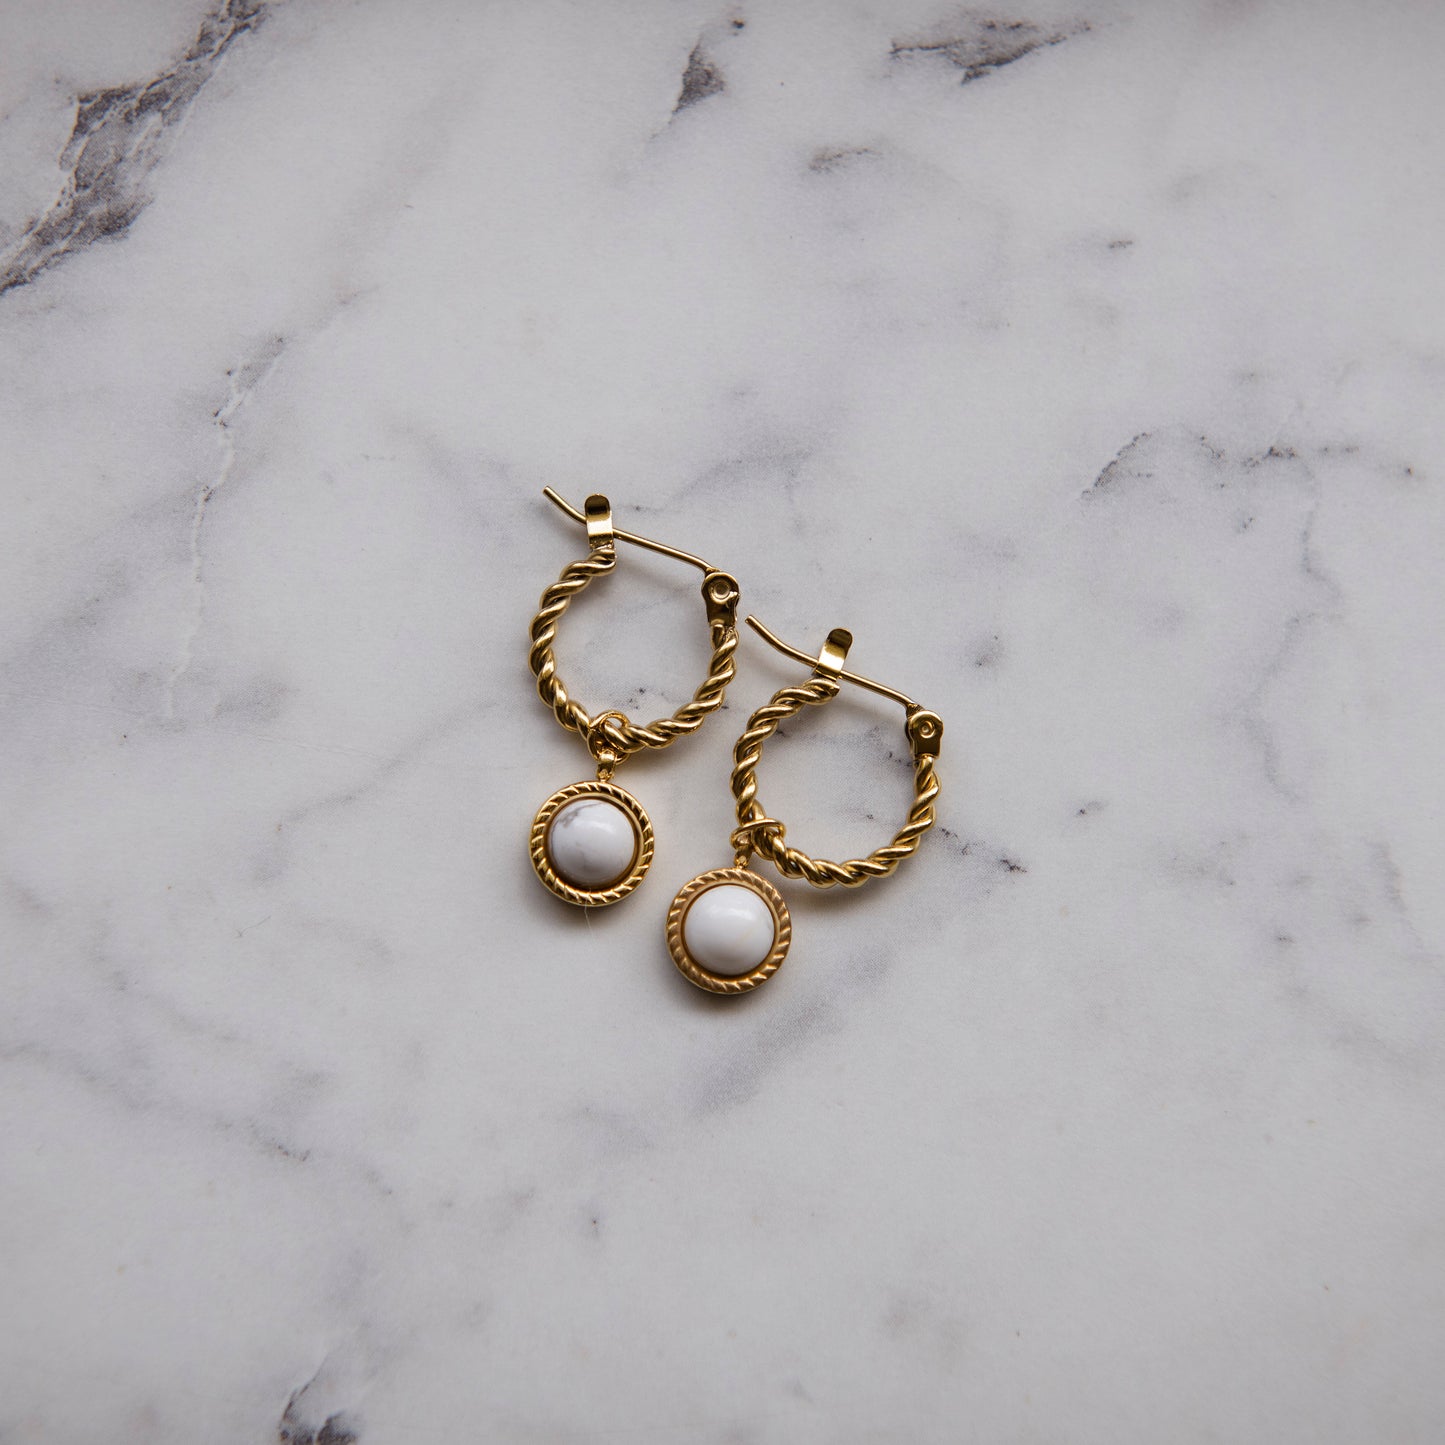 Ophelia Gold Hoops with Natural Stone